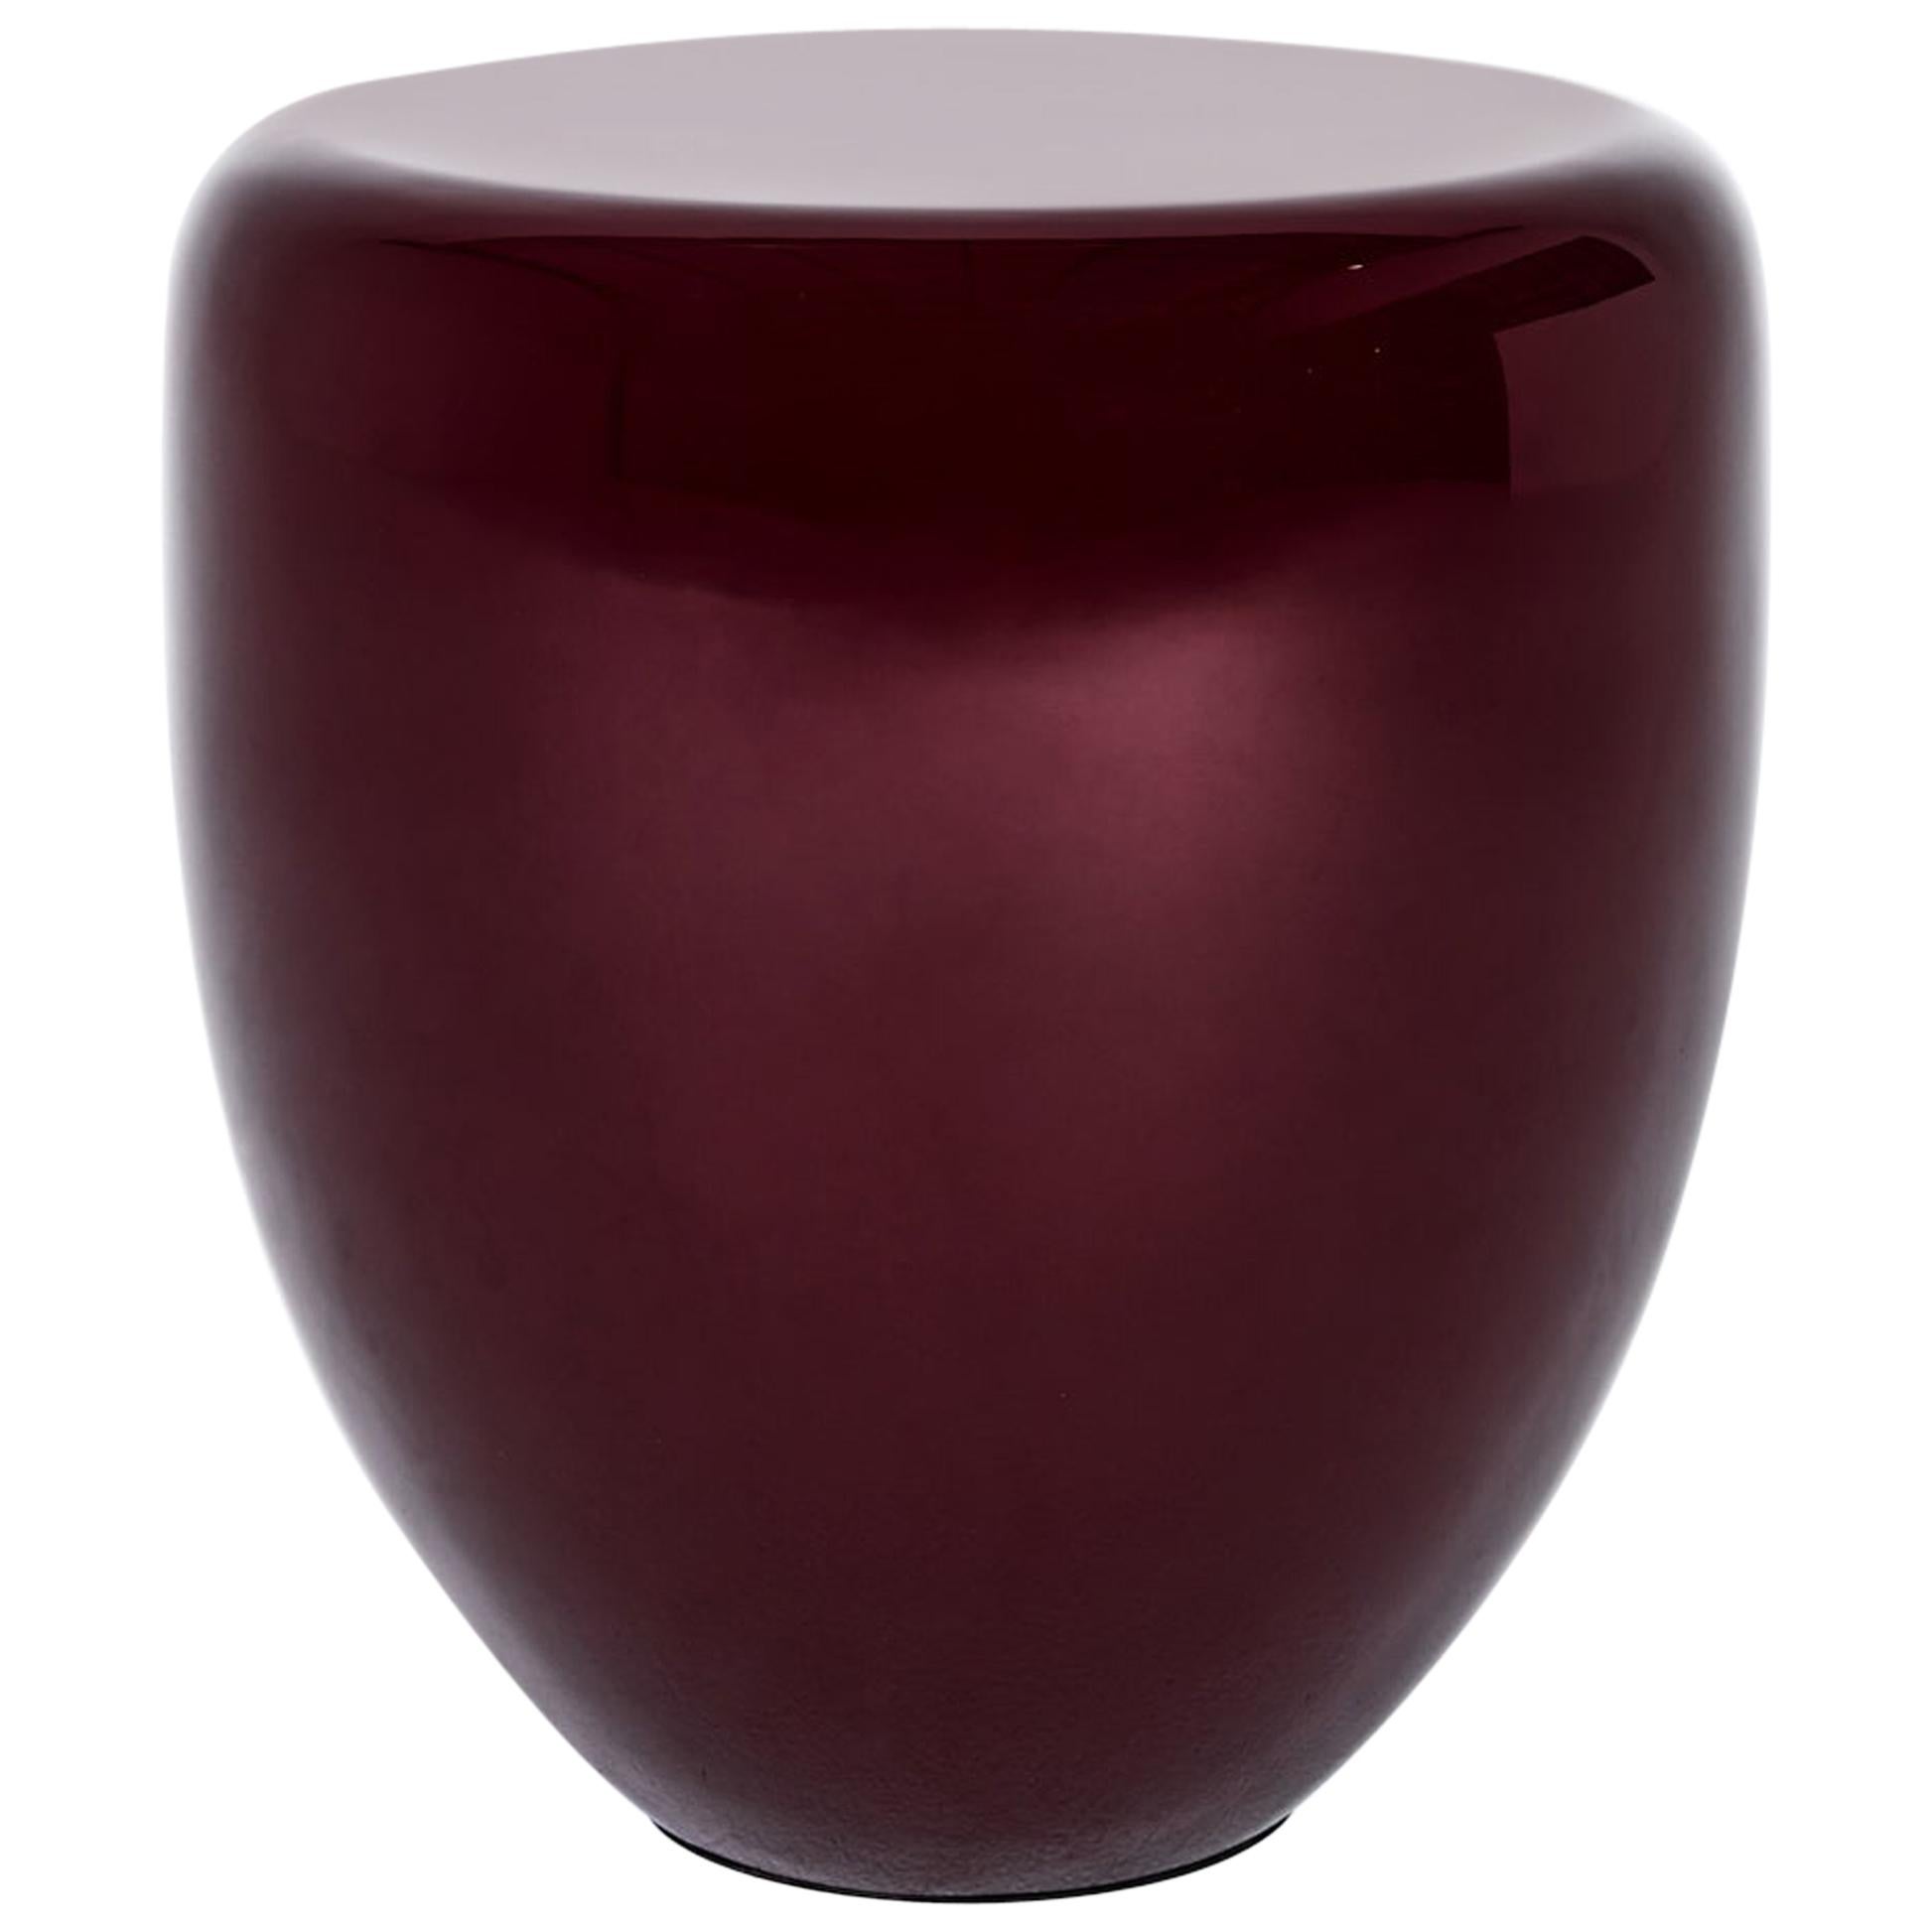 Side Table, Deep Garnet DOT by Reda Amalou Design, 2017 - Glossy or mate lacquer